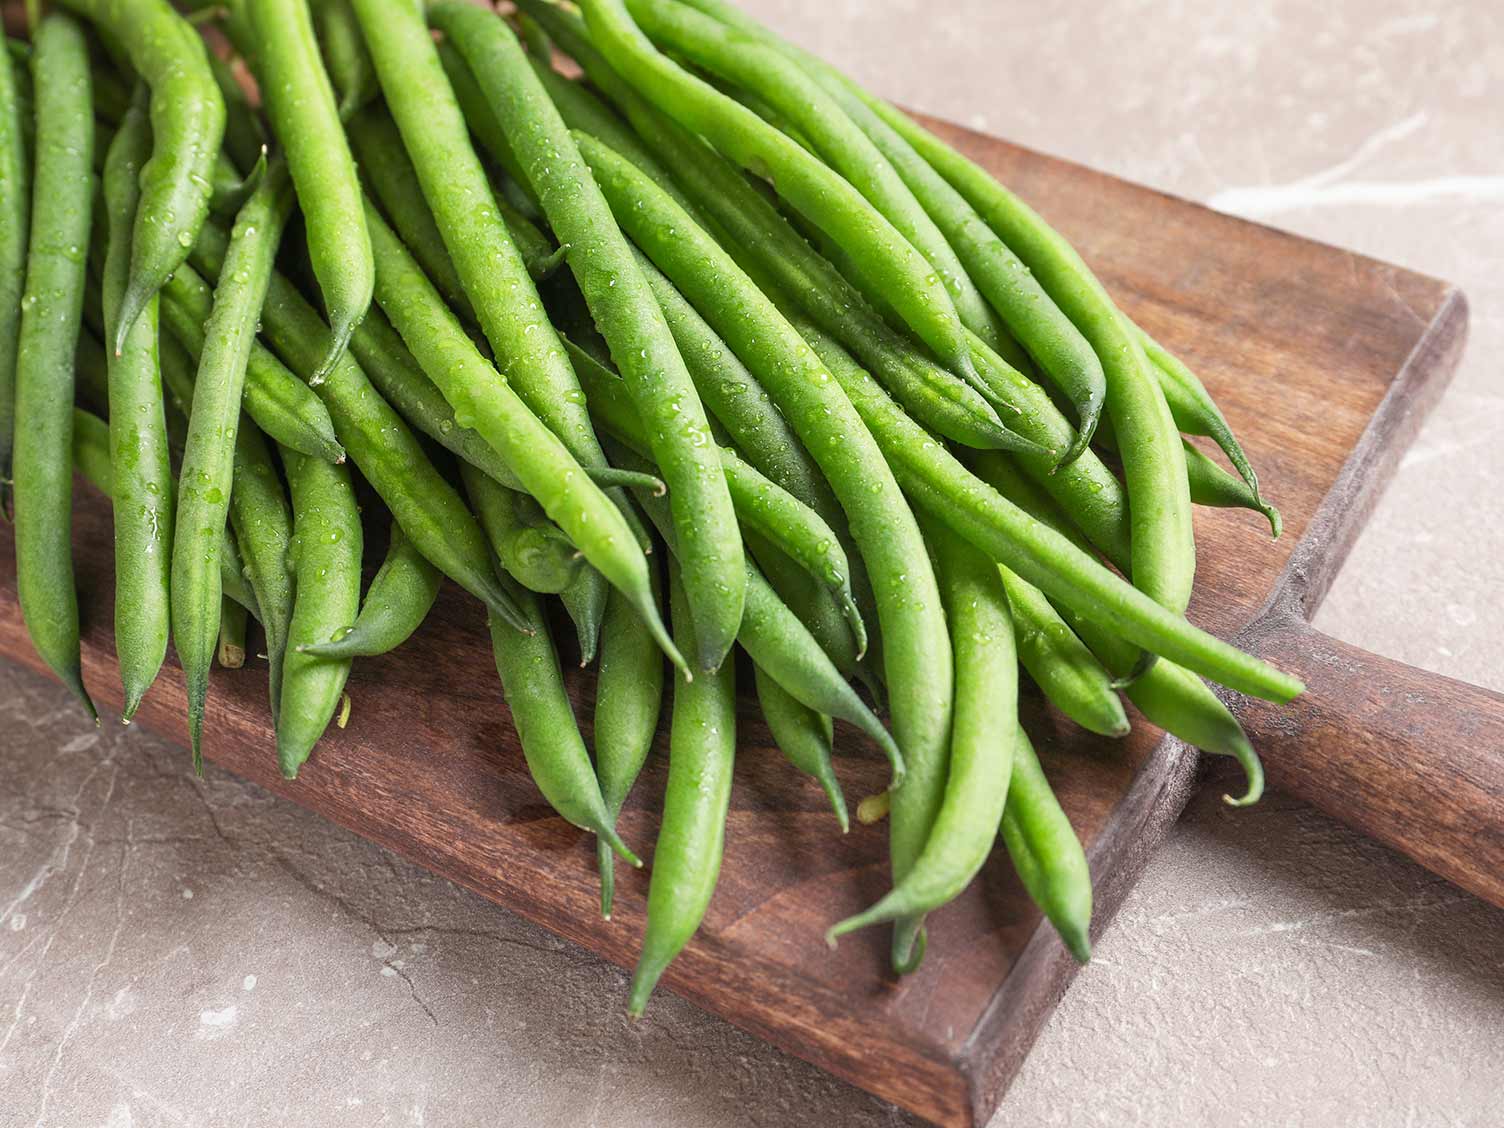 Harvested French beans